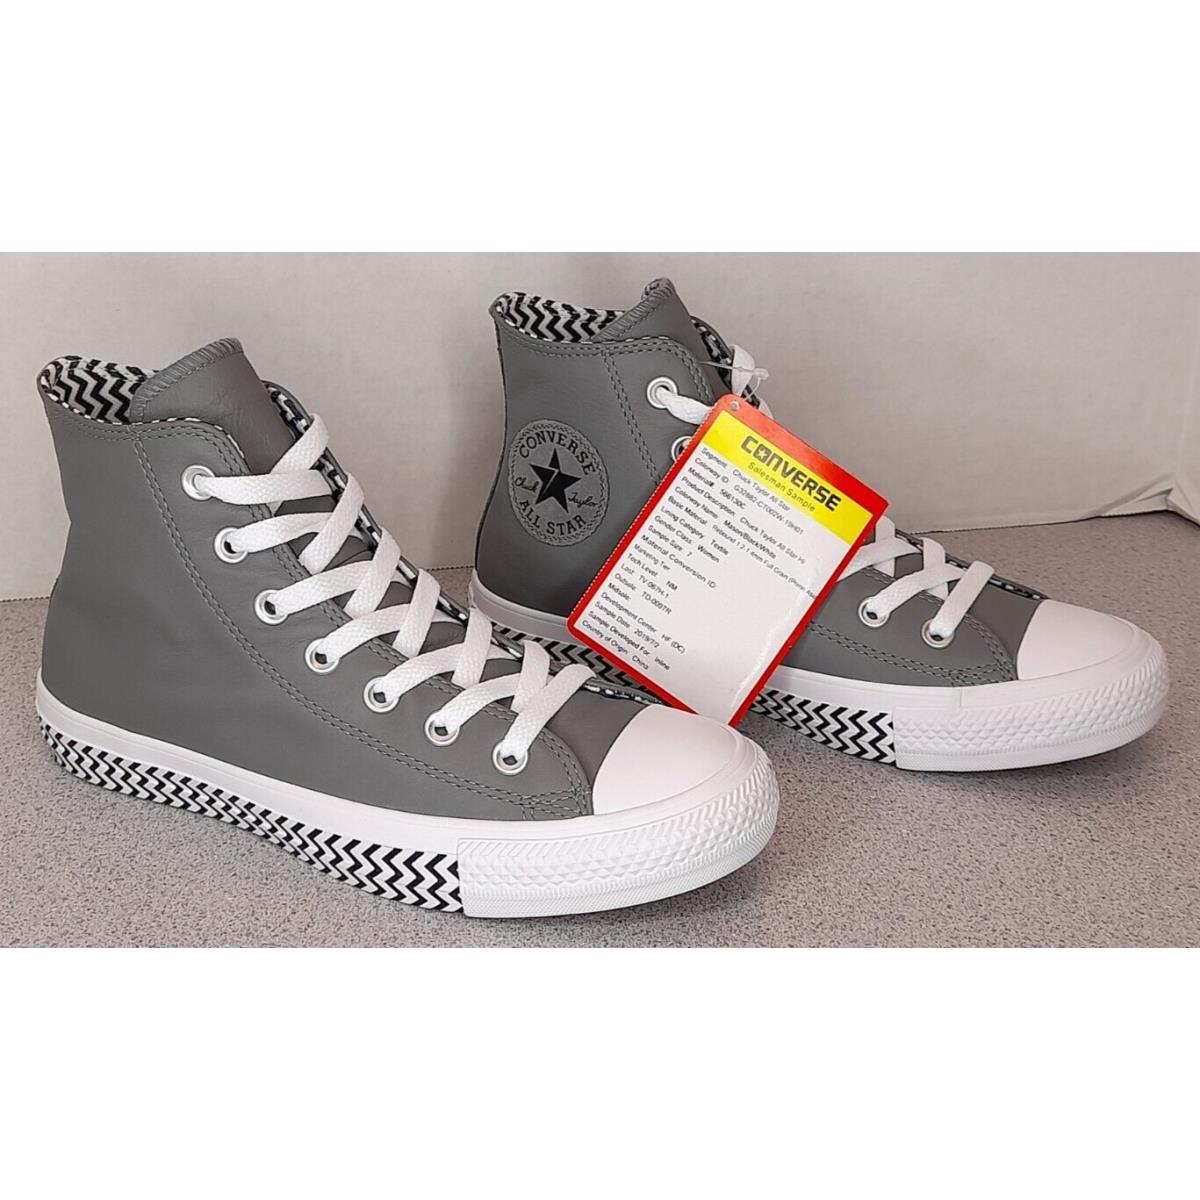 Strait thong Disgrace Kakadu Converse All Star Chuck Taylor Hi Top Leather Sneakers Shoes Salesman Sample  | 002260251857 - Converse shoes Chuck Taylor - Charcoal Gray | SporTipTop